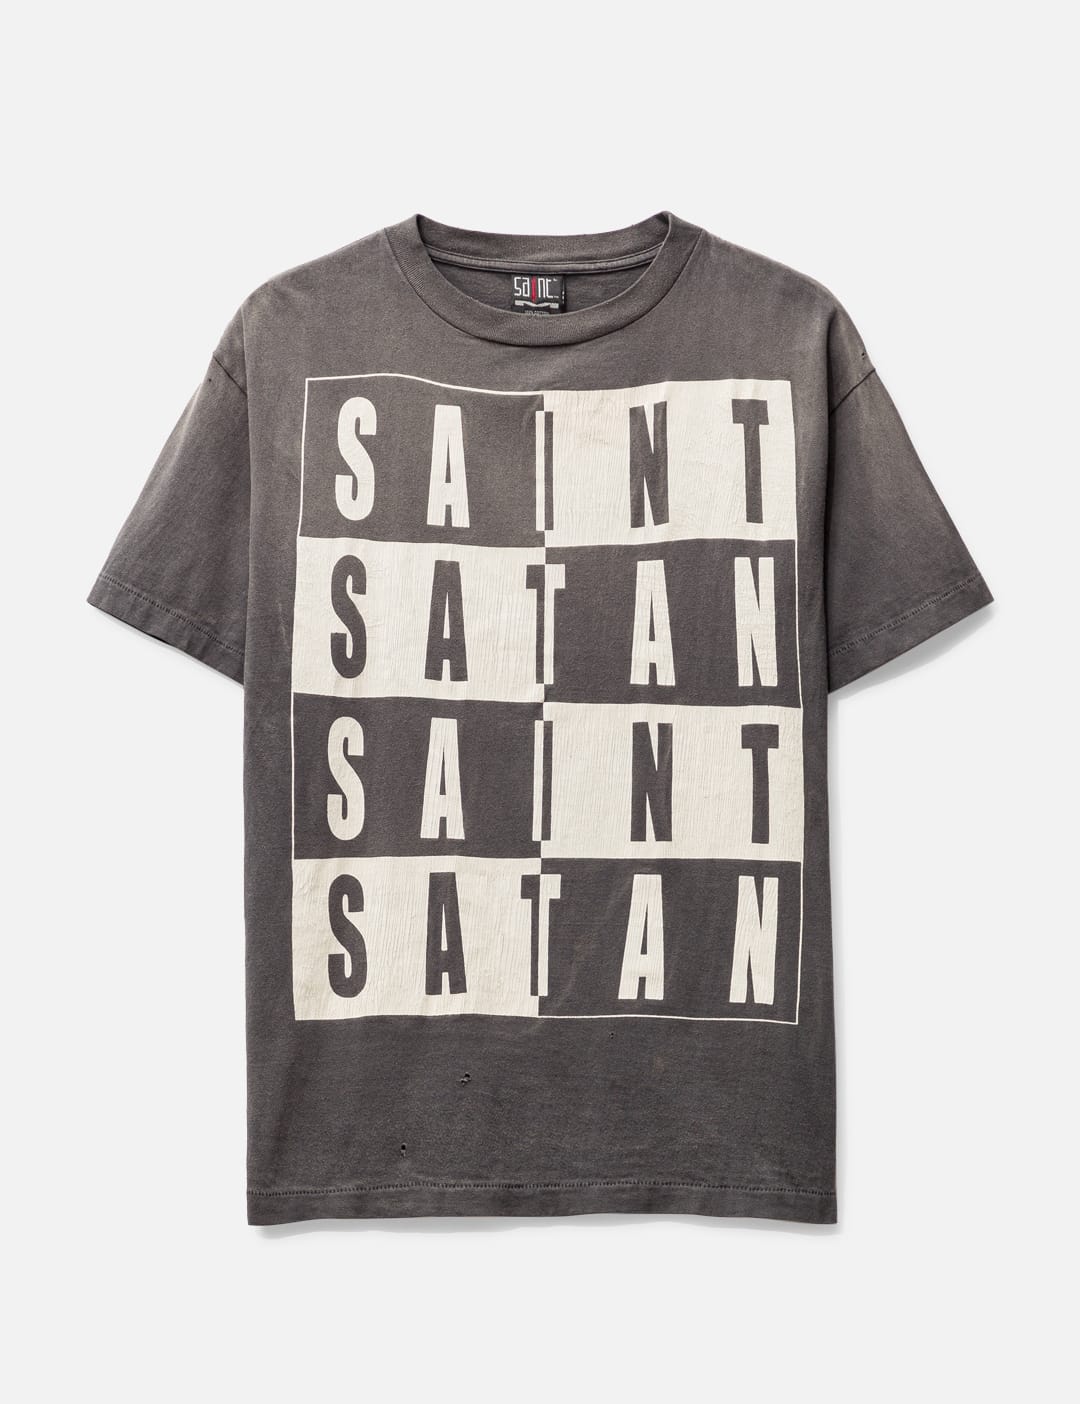 Saint Michael - MIGHTY DEVIL T-shirt | HBX - Globally Curated